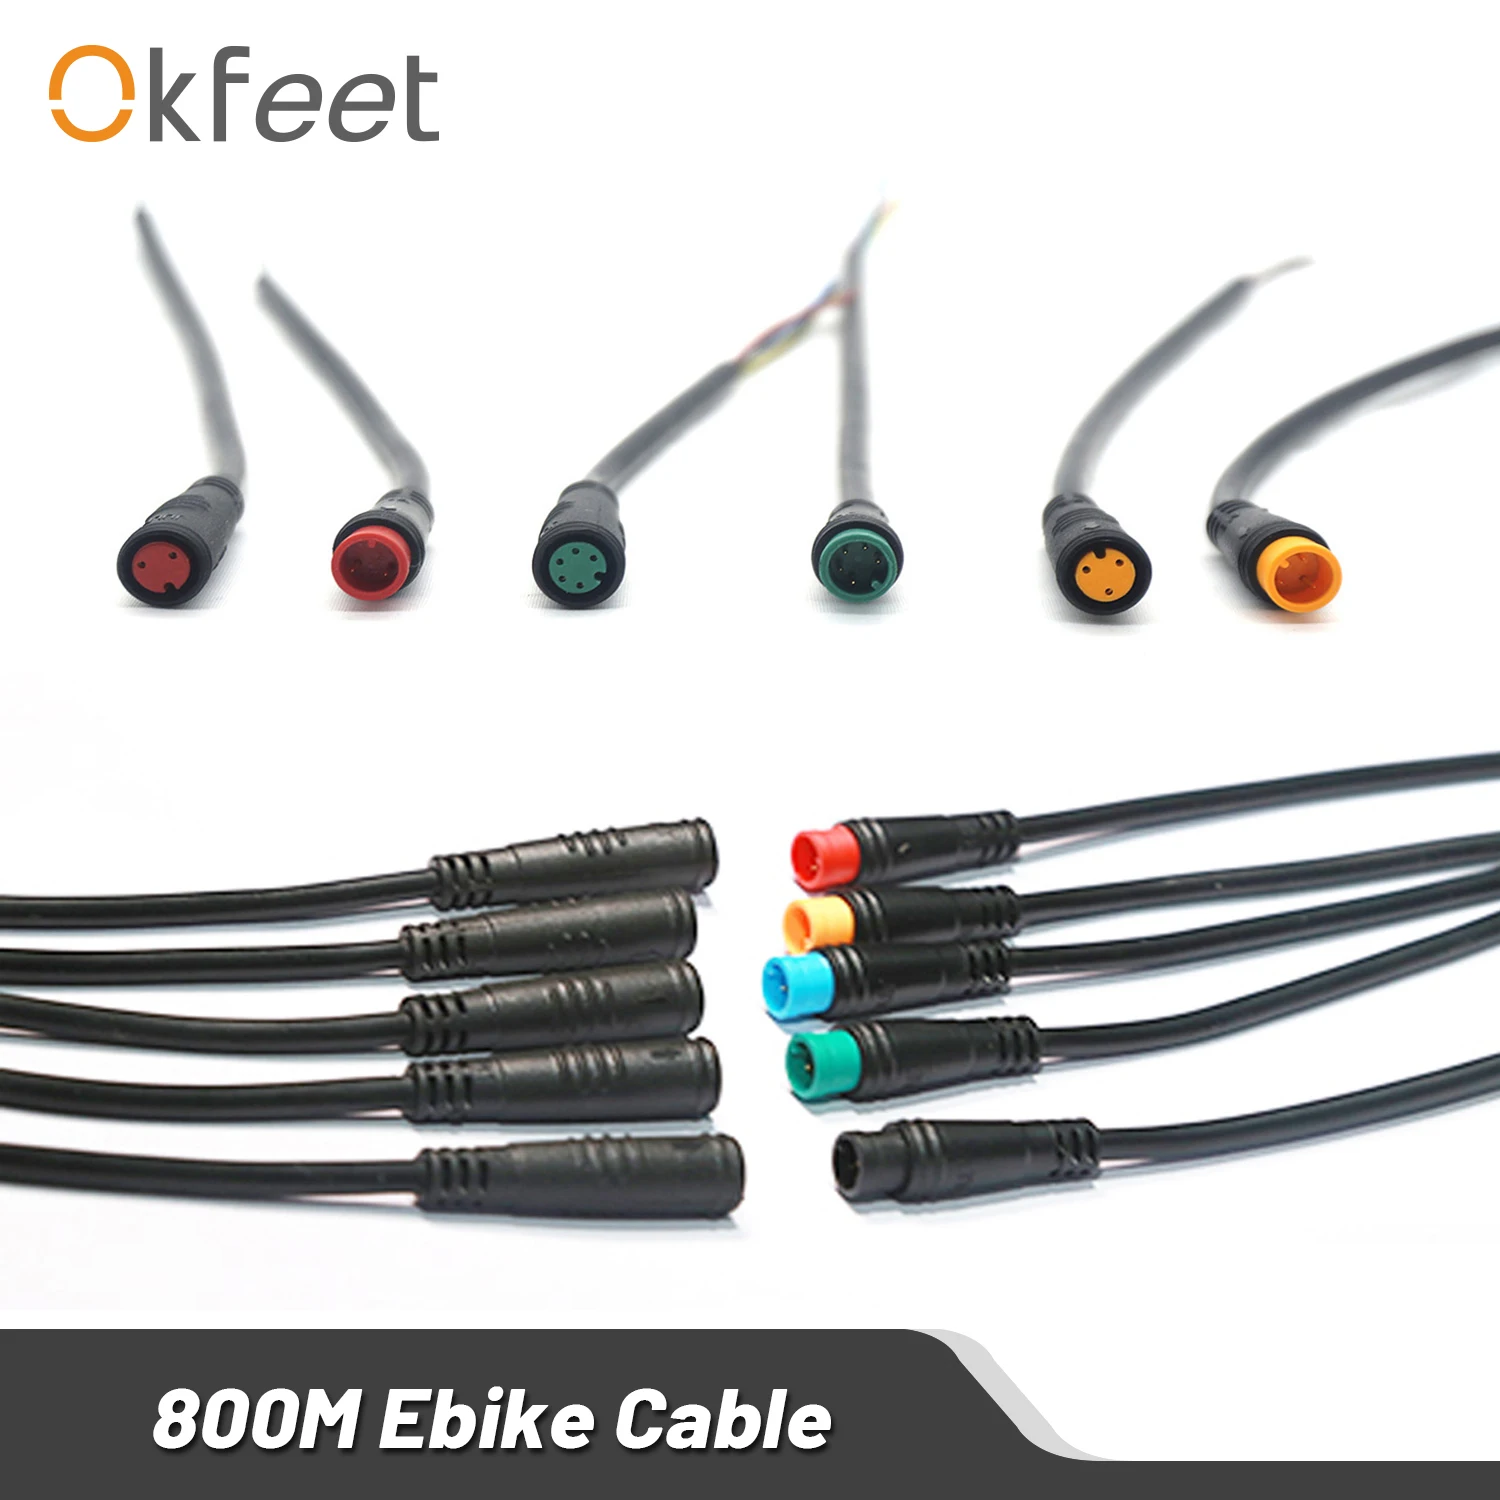 Julet Connector 2,3,4,5,Pin Extension Cable Connector For Bafang Ebike Display